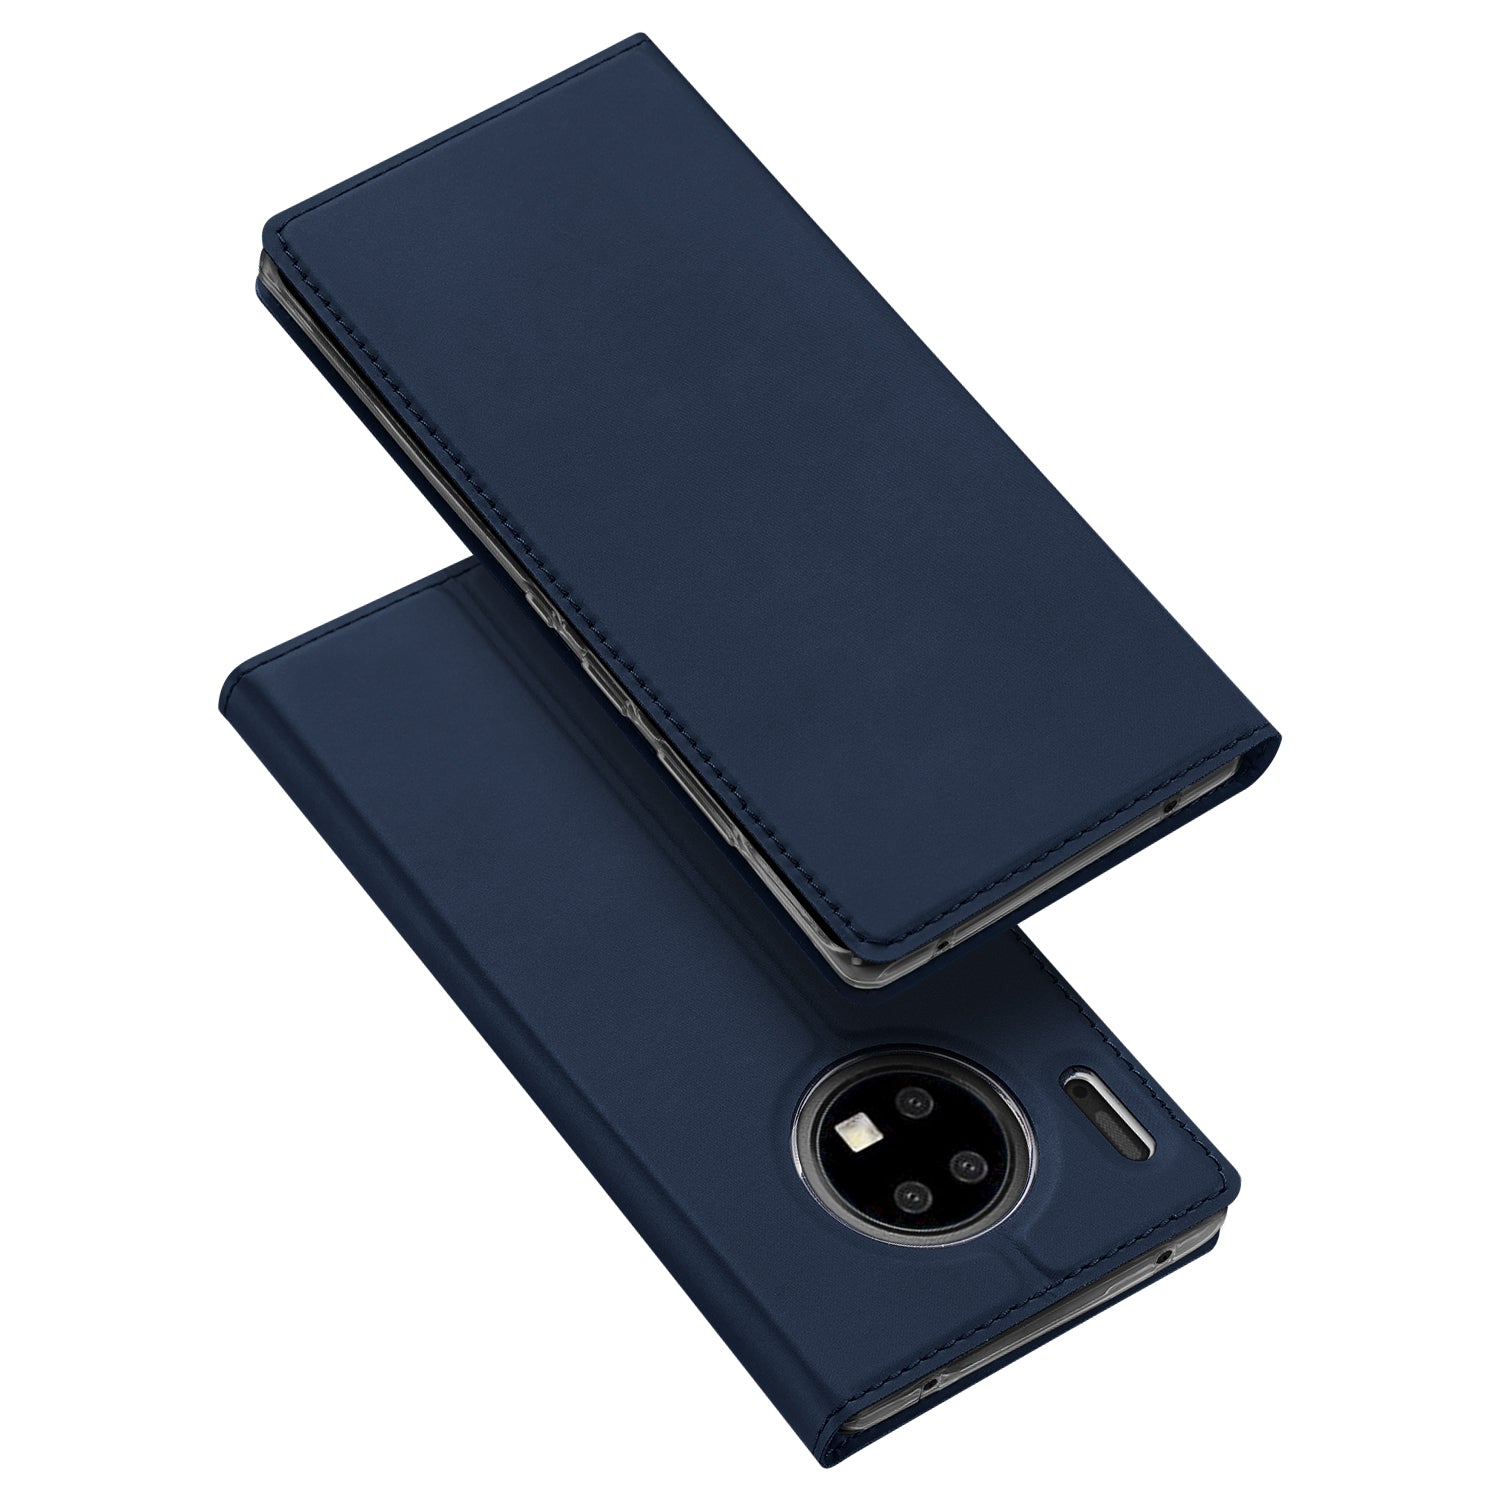 Huawei Mate 30 Pro Cases, Covers &amp; Accessories